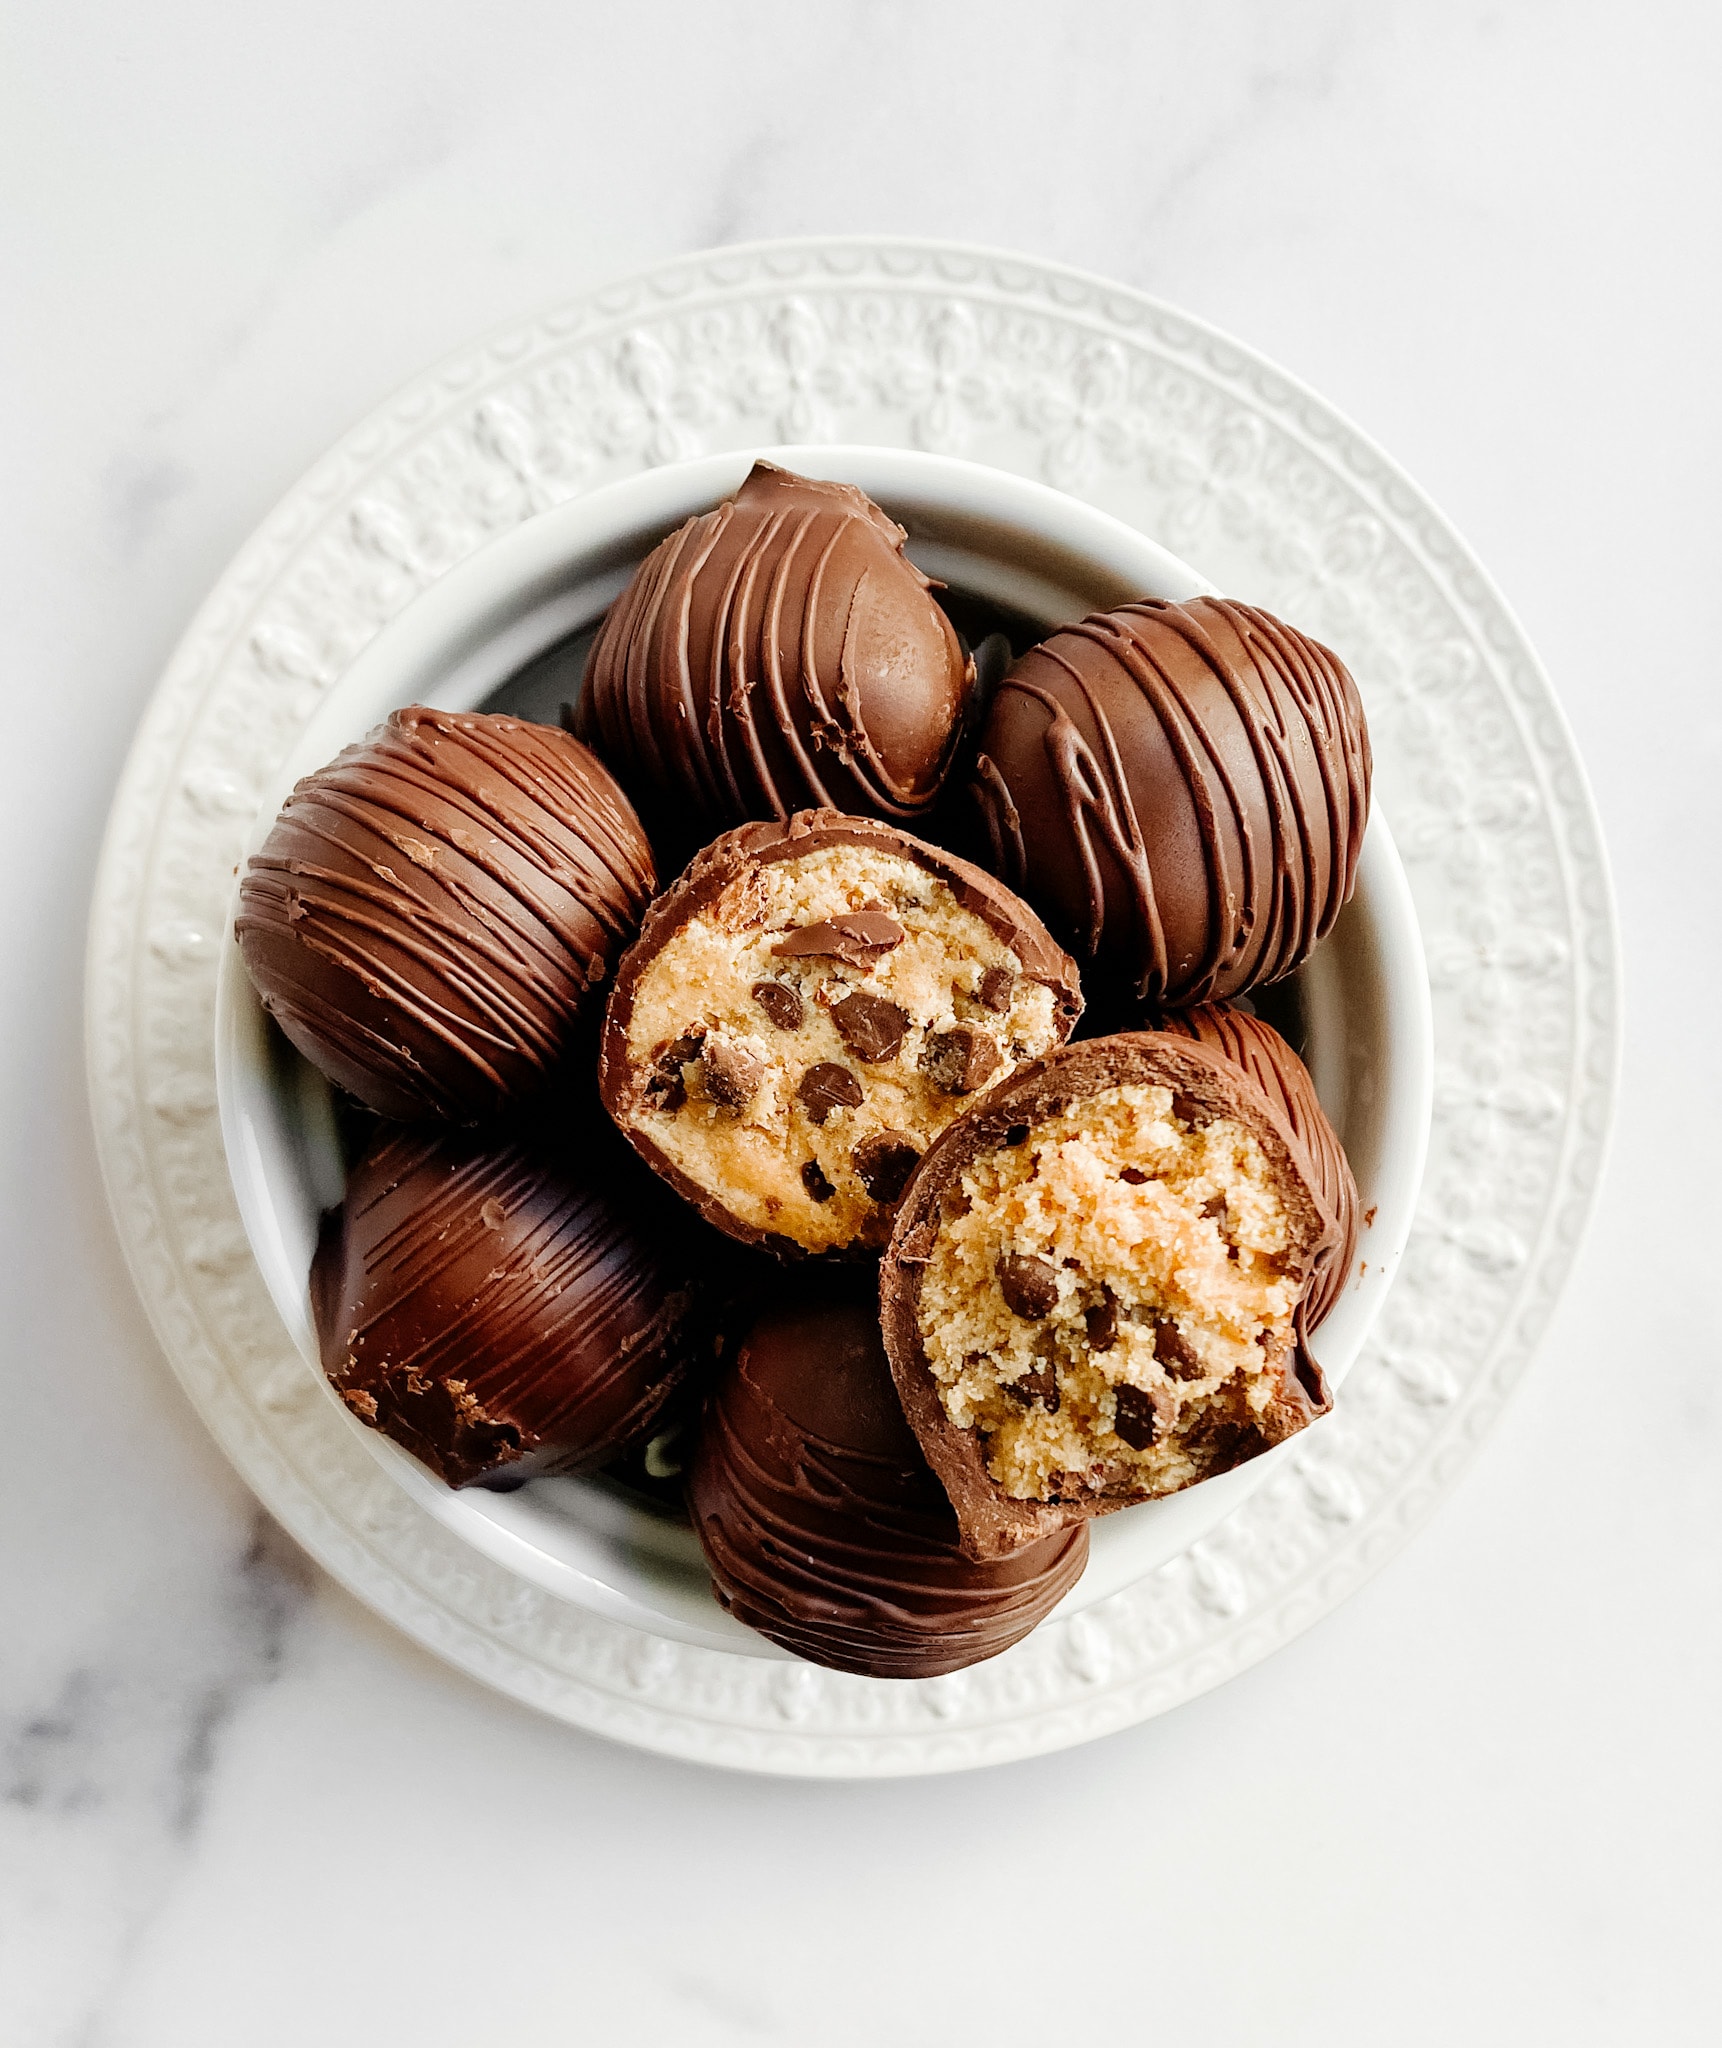 Gluten-free cookie dough truffles on a small plate aerial view cut open at the top of the pile.